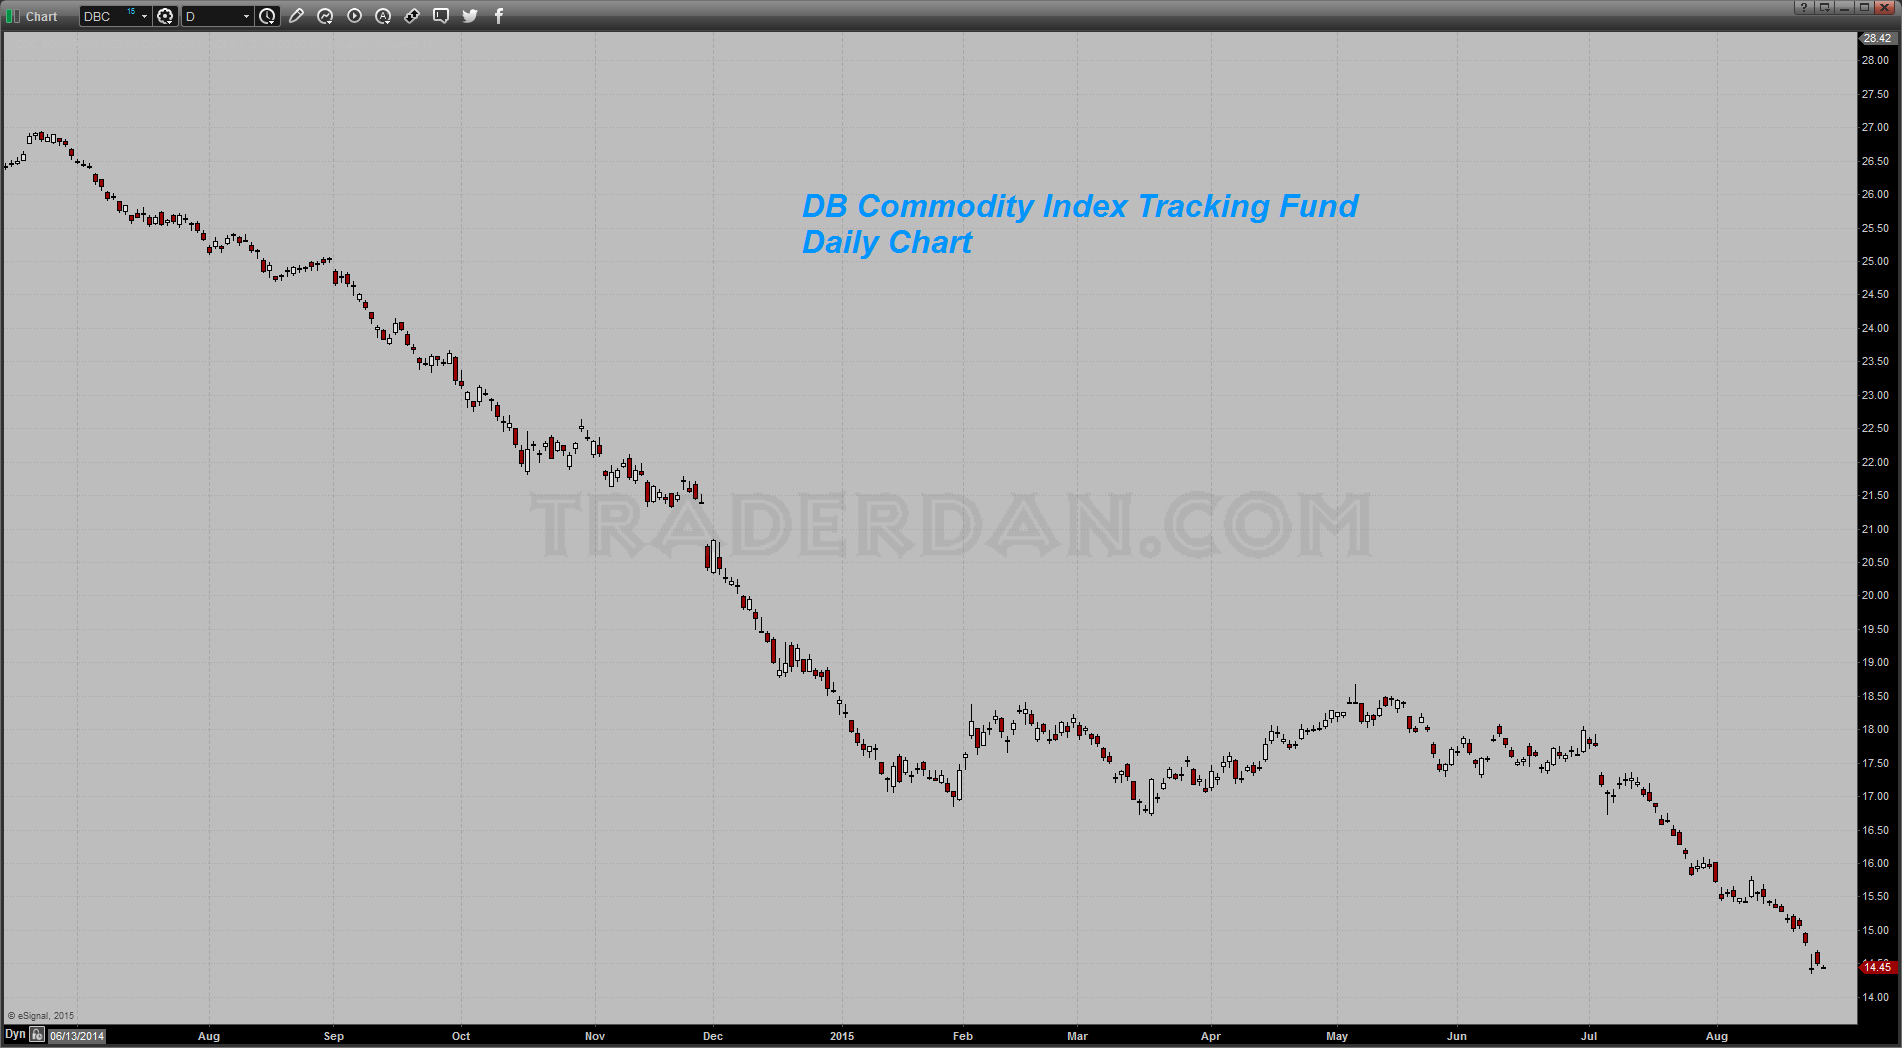 DB Commodity Index Tracking Fund Daily 2014-2015